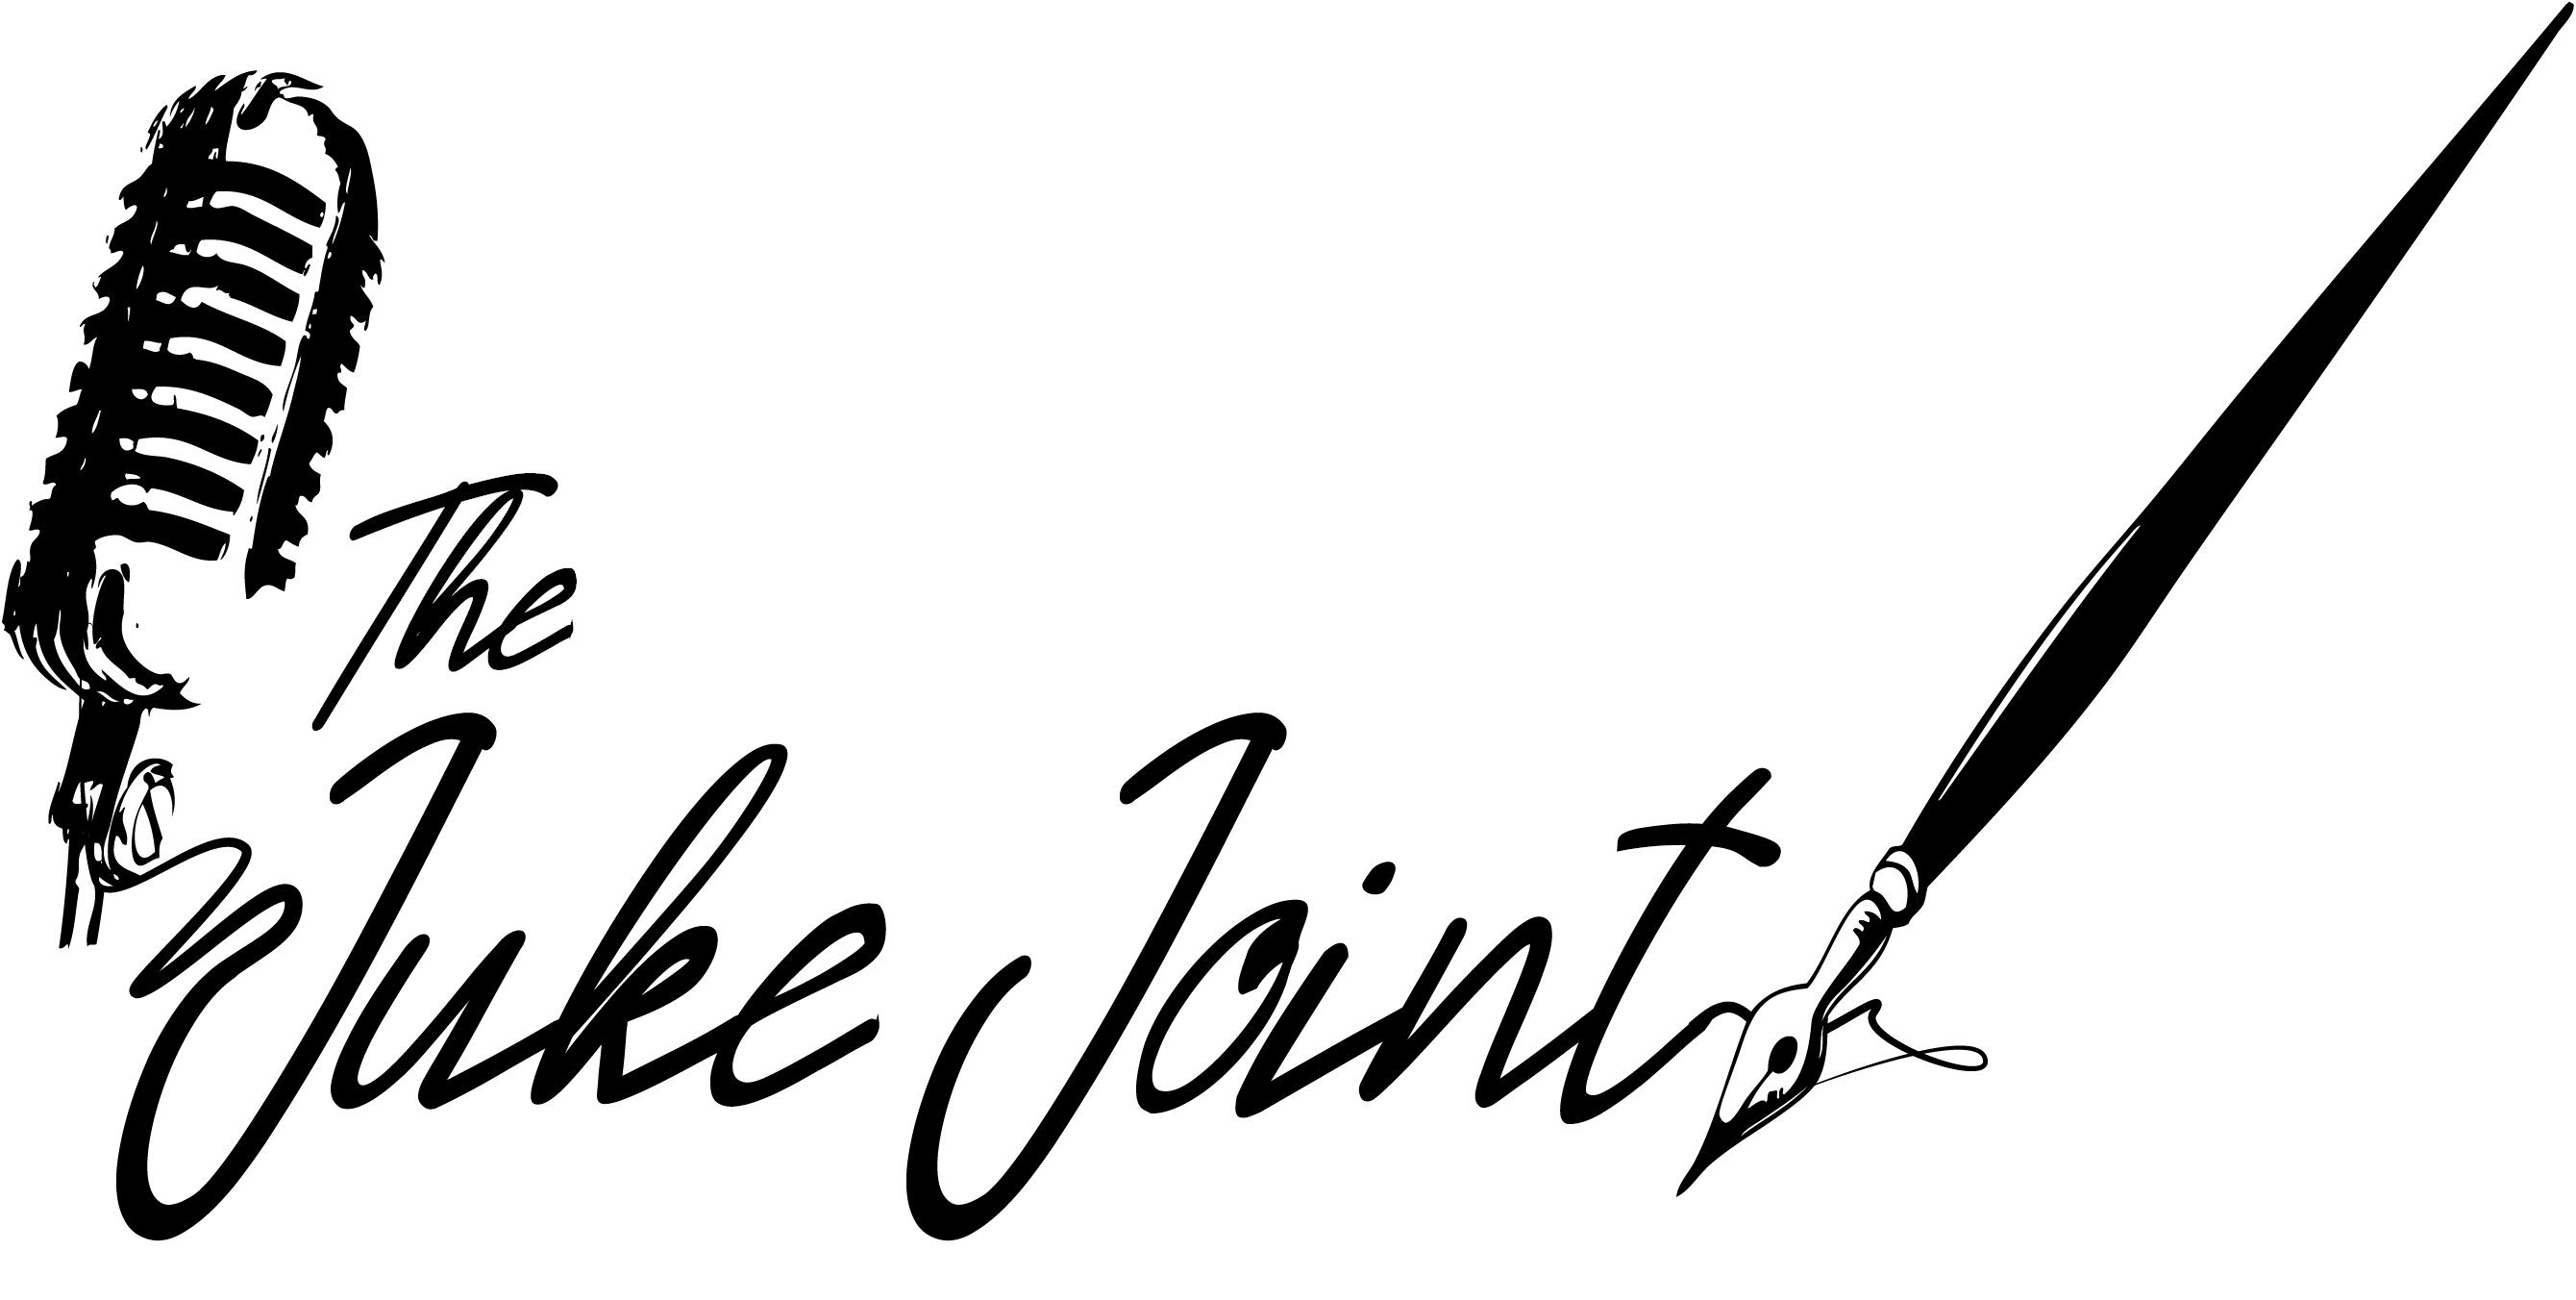 The Juke Joint. A Cleveland based online magazine. #AlbumReviews #Interviews #articles #Jukejointofficial